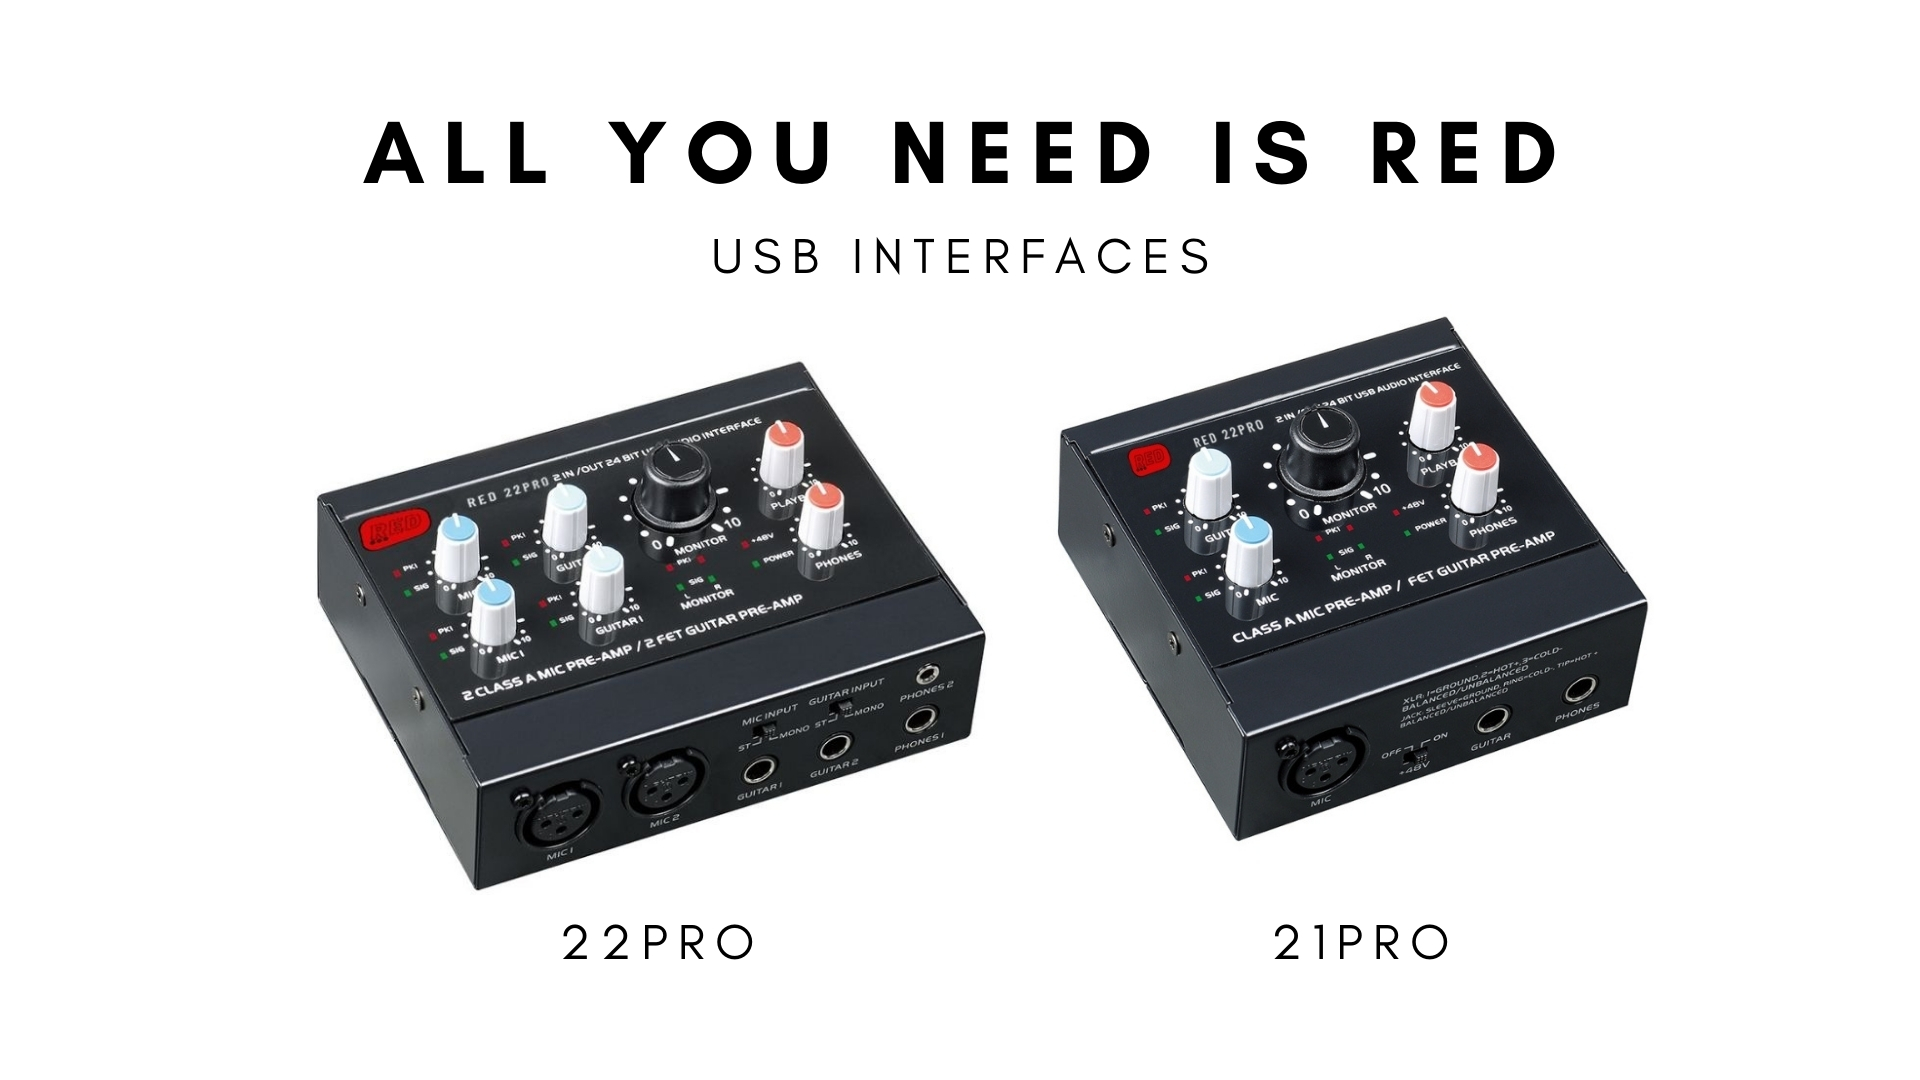 USB INTERFACES - ALL YOU NEED IS RED